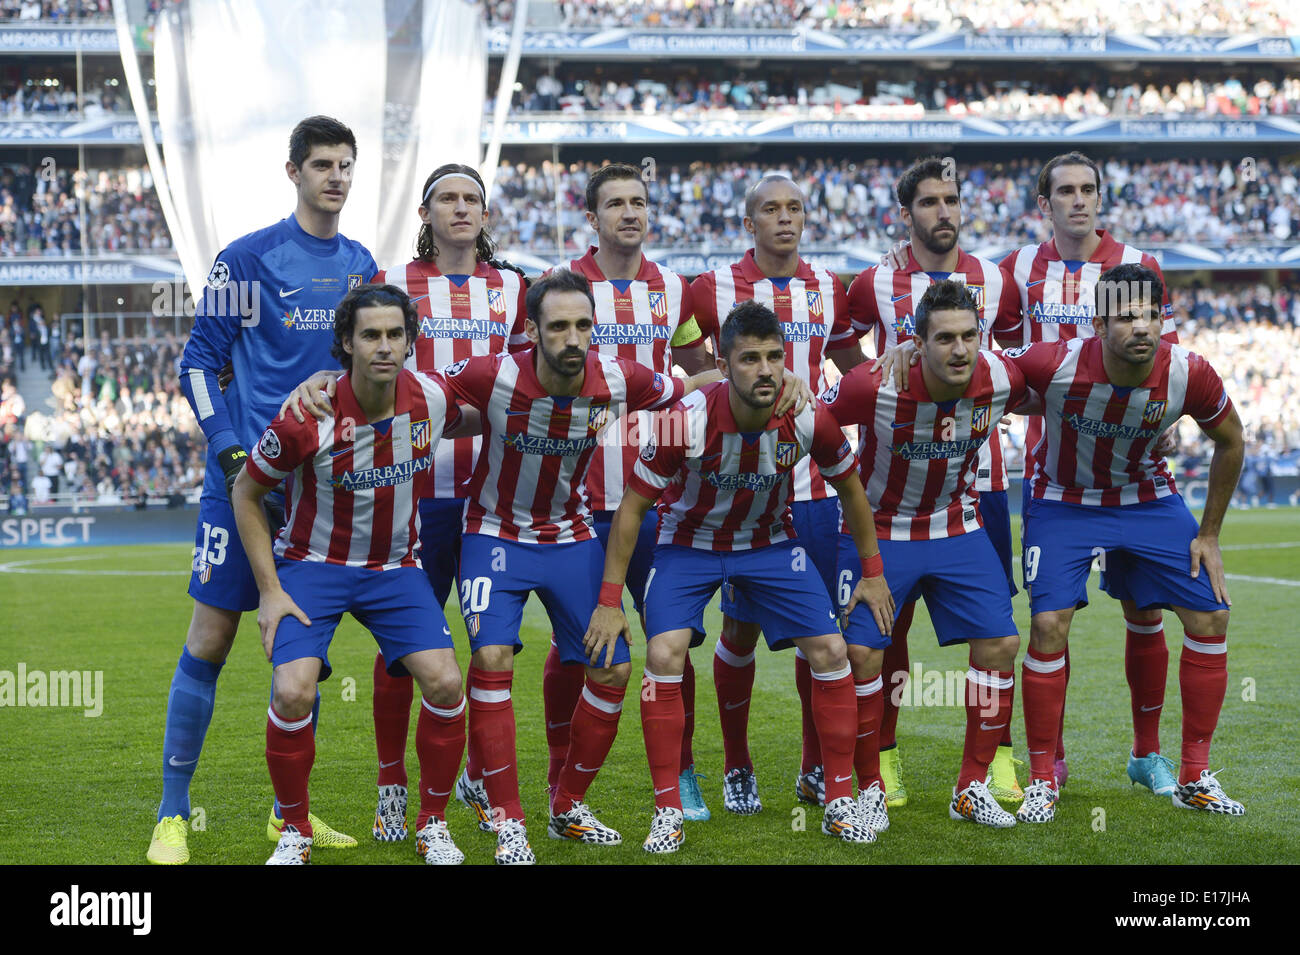 Lisbon, Portugal. 24th May, 2014. Atletico Madrid team group line-up  Football/Soccer : UEFA Champions League final match between Real Madrid 4-1  Atletico de Madrid at Luz stadium in Lisbon, Portugal . ©